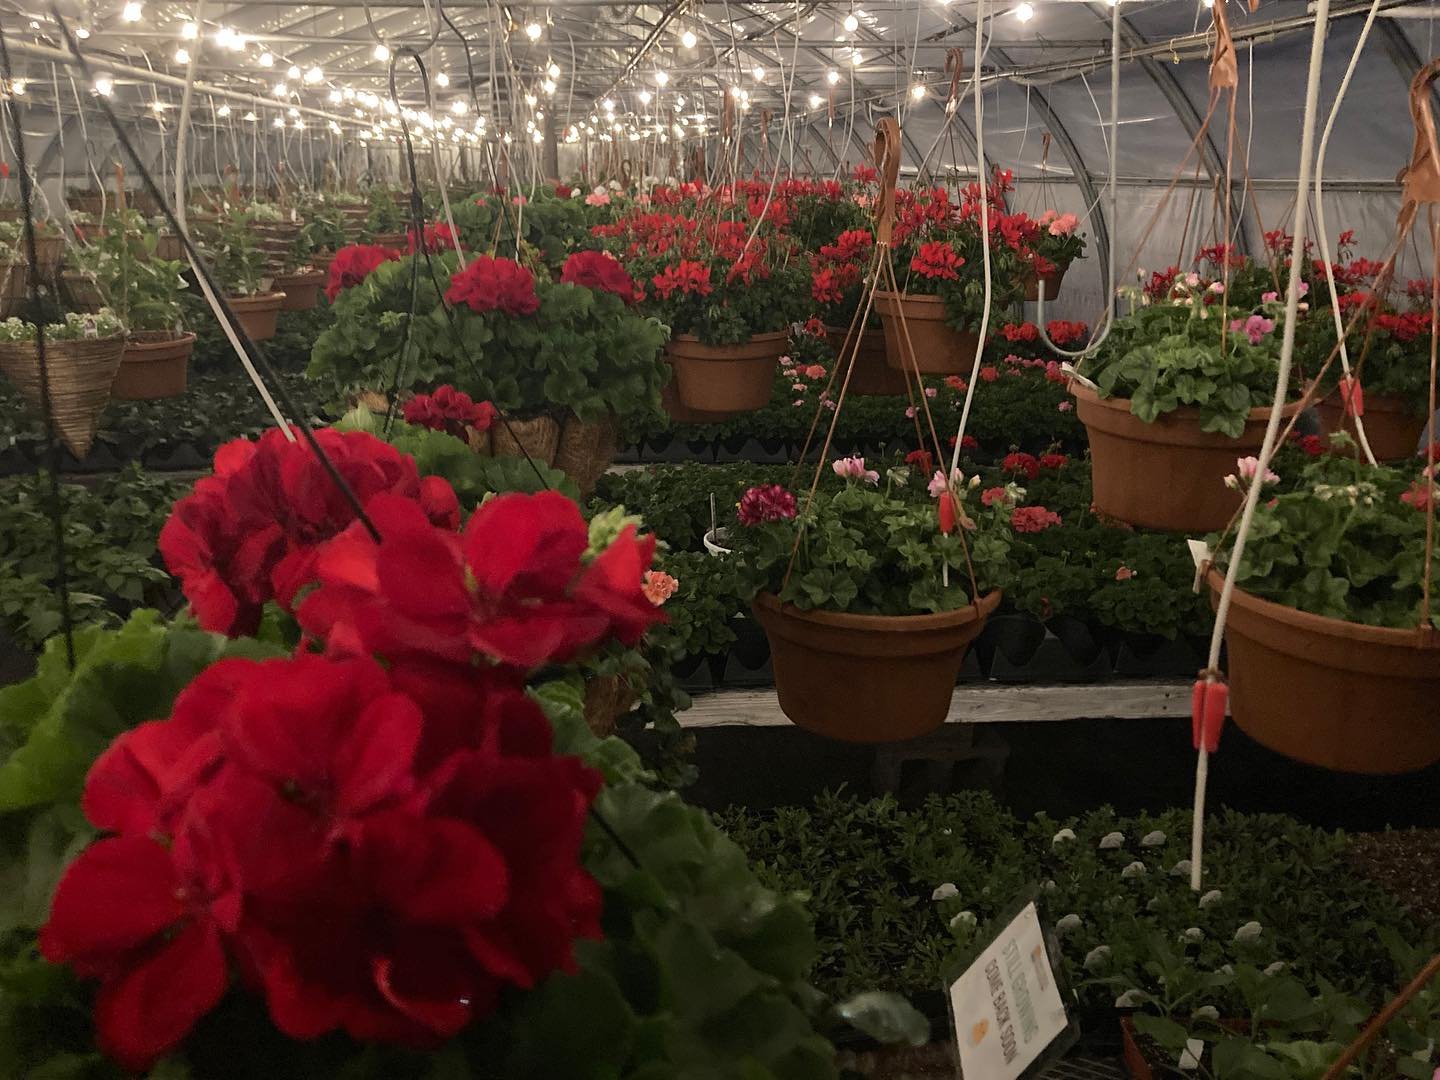 Late nights in the greenhouse are more fun with twinkly lights ✨✨ we&rsquo;re getting ready for a busy Mothers Day weekend and hope to see you in the greenhouse too! #uppervalleyvtnh #norwichvt #vermont #vtlife #greenhouse #gardening #nursery #spring